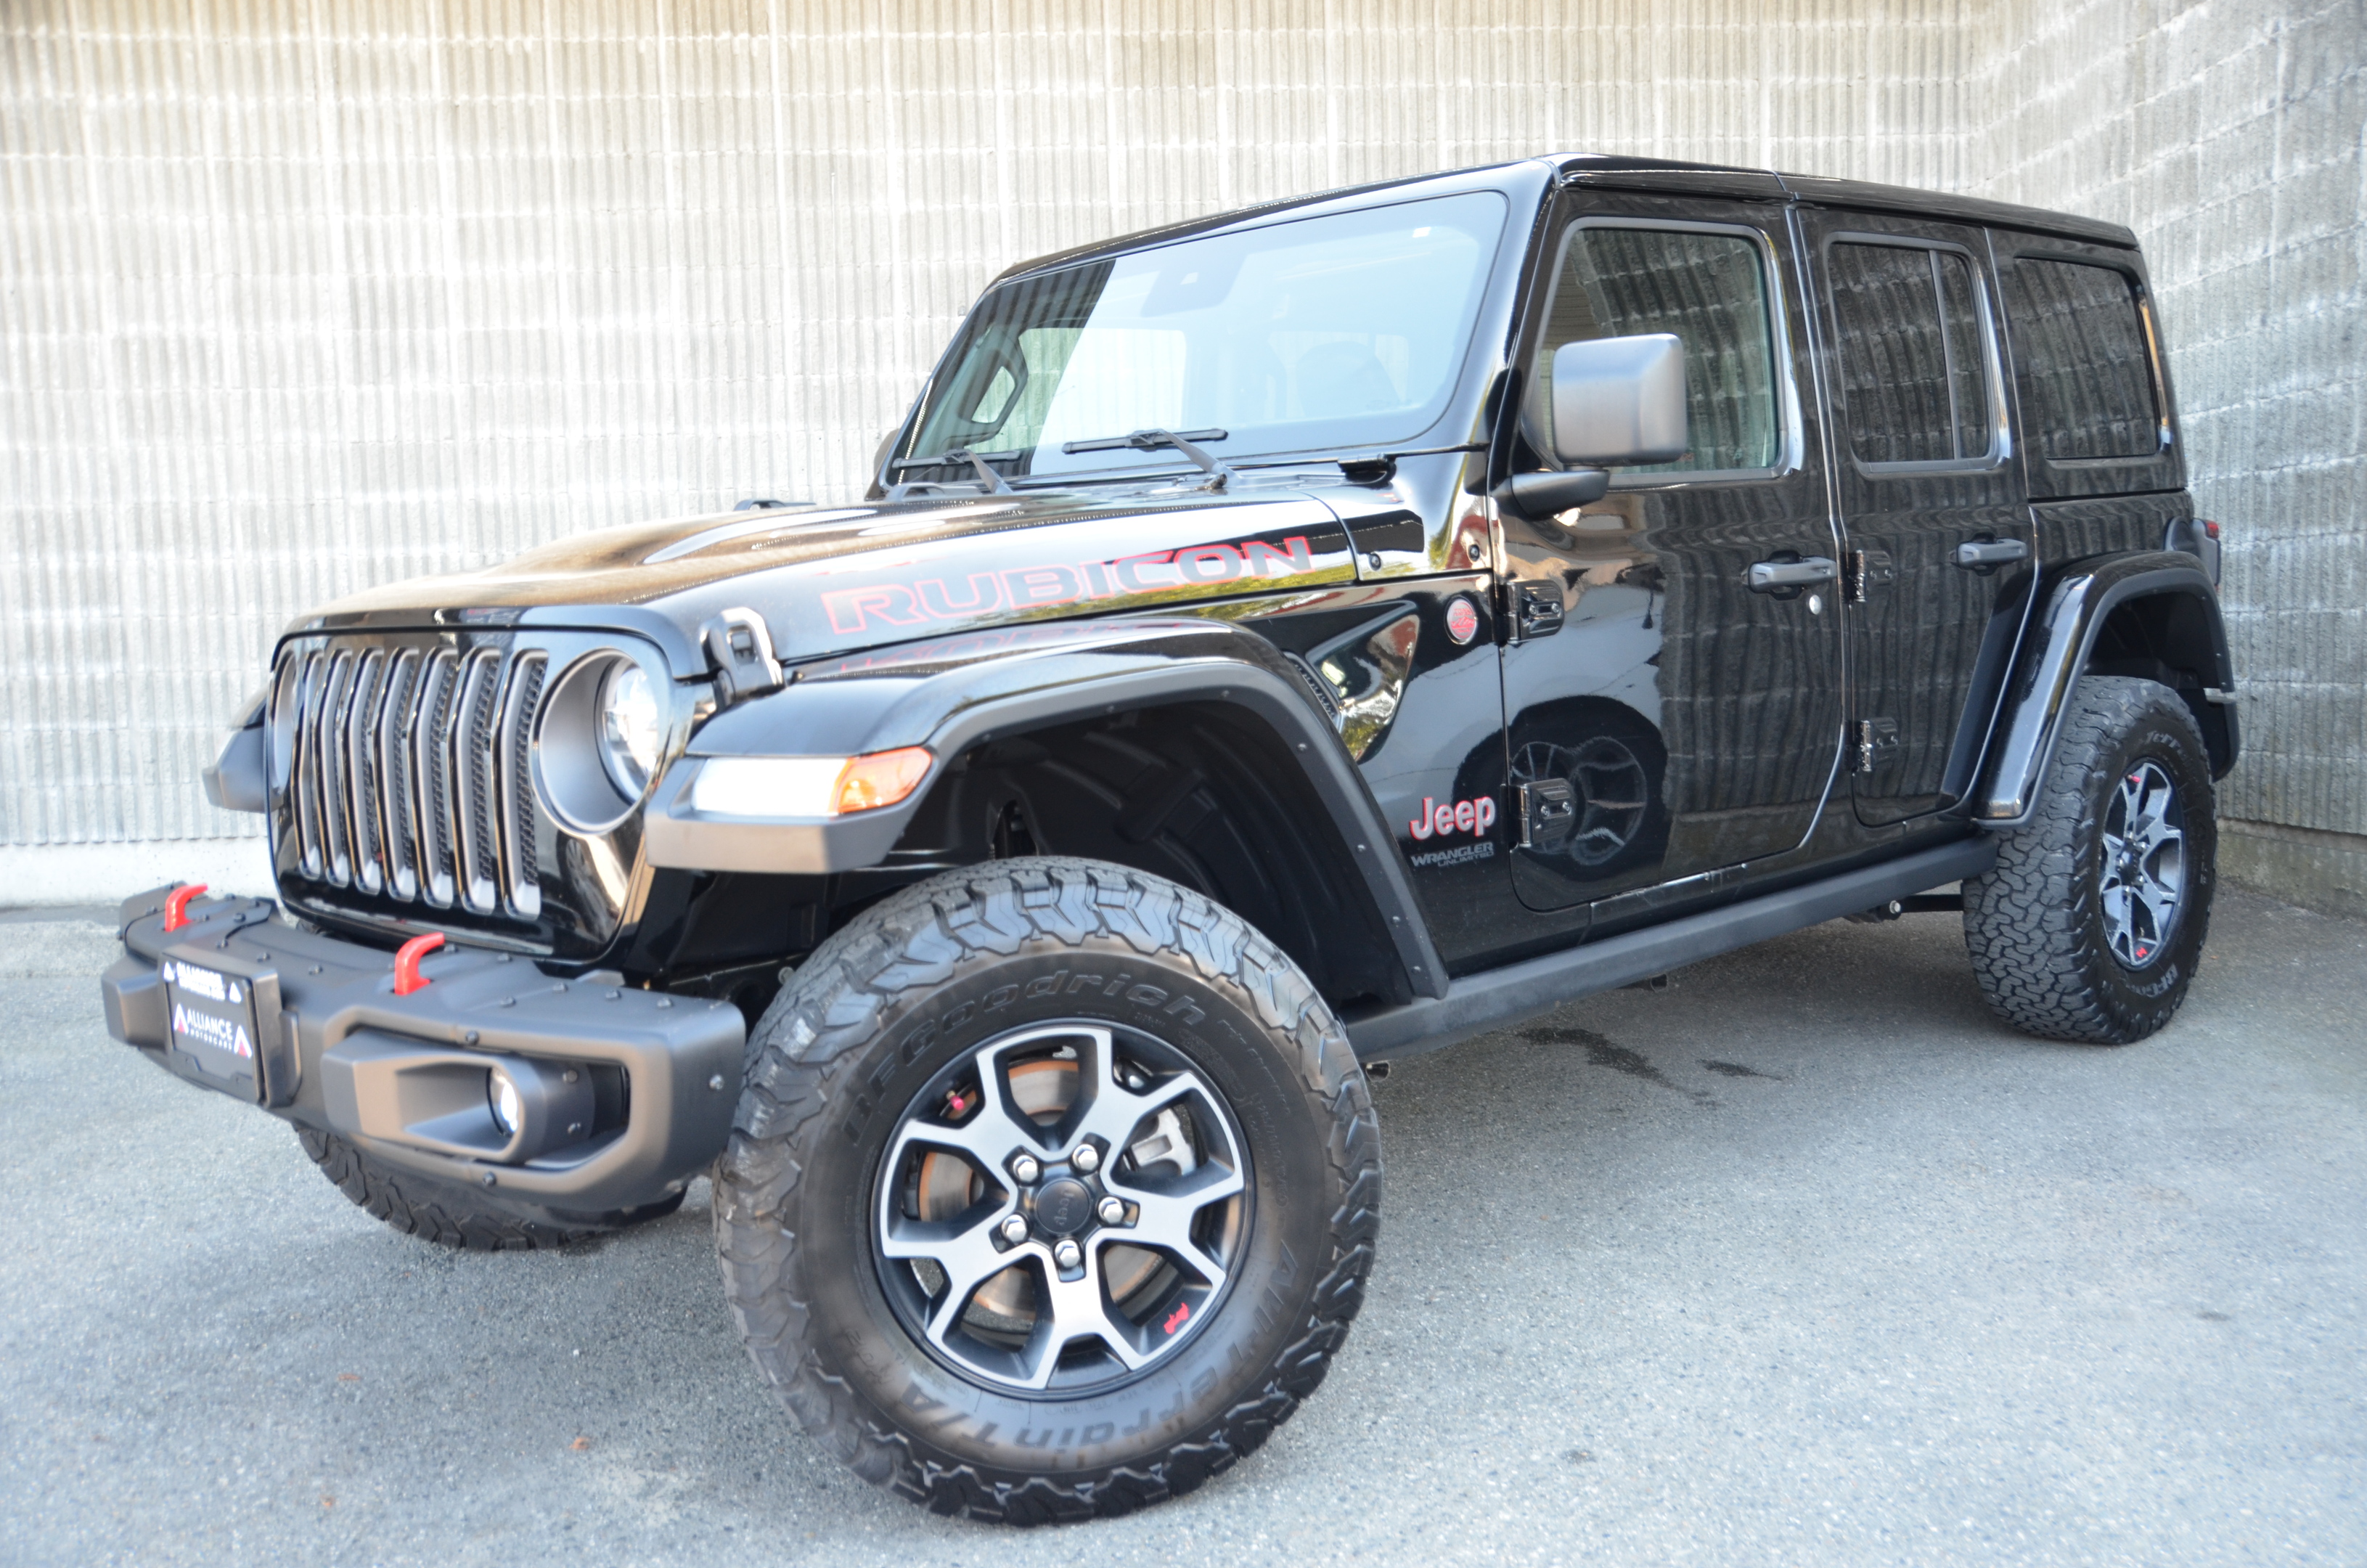 2019 Jeep WRANGLER UNLIMITED Unlimited Rubicon 4x4 Nav, Leather, Freedom Top